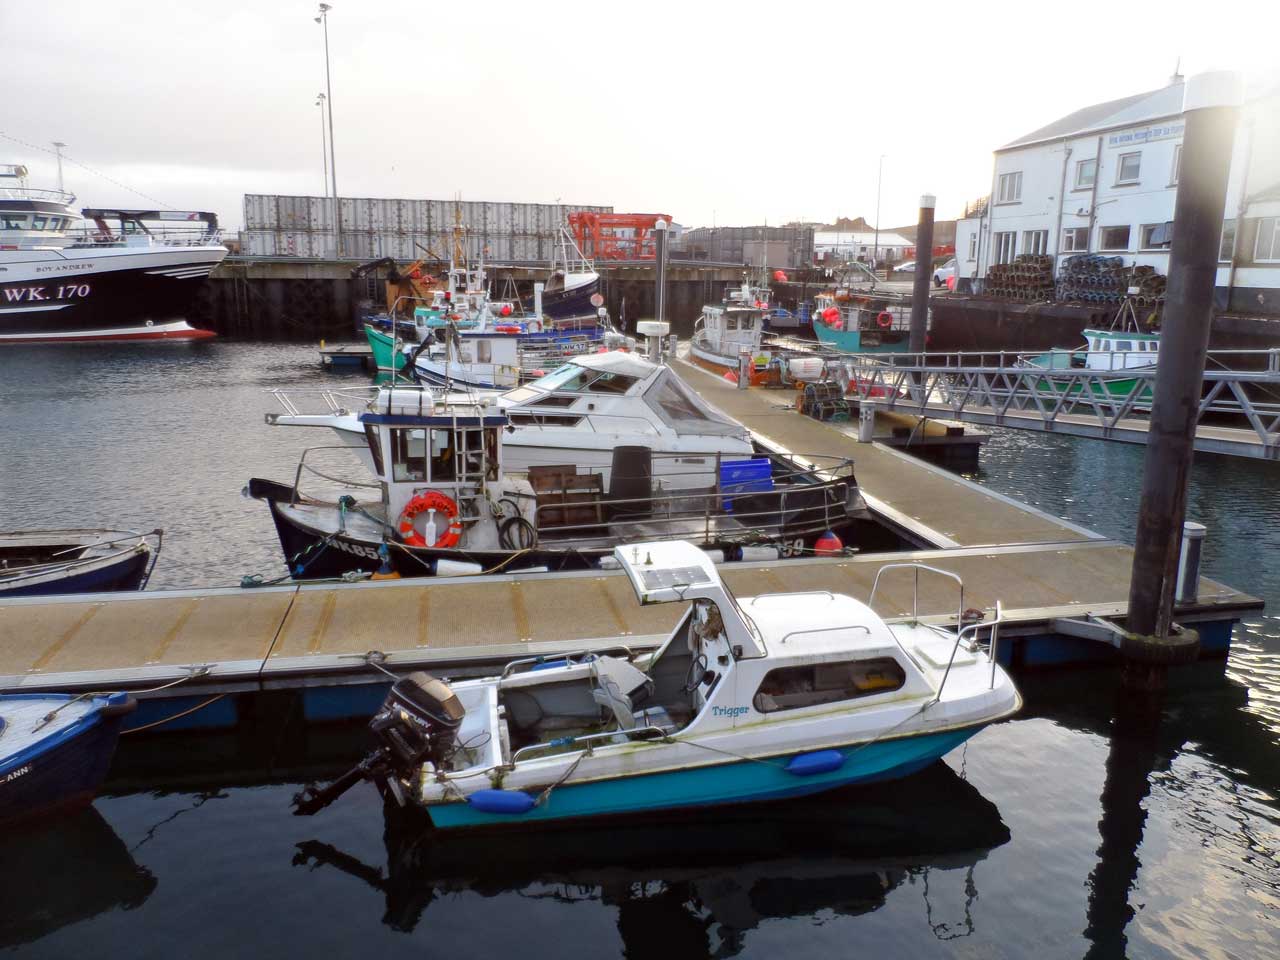 Photo: Scrabster Harbour At The End Of 2019